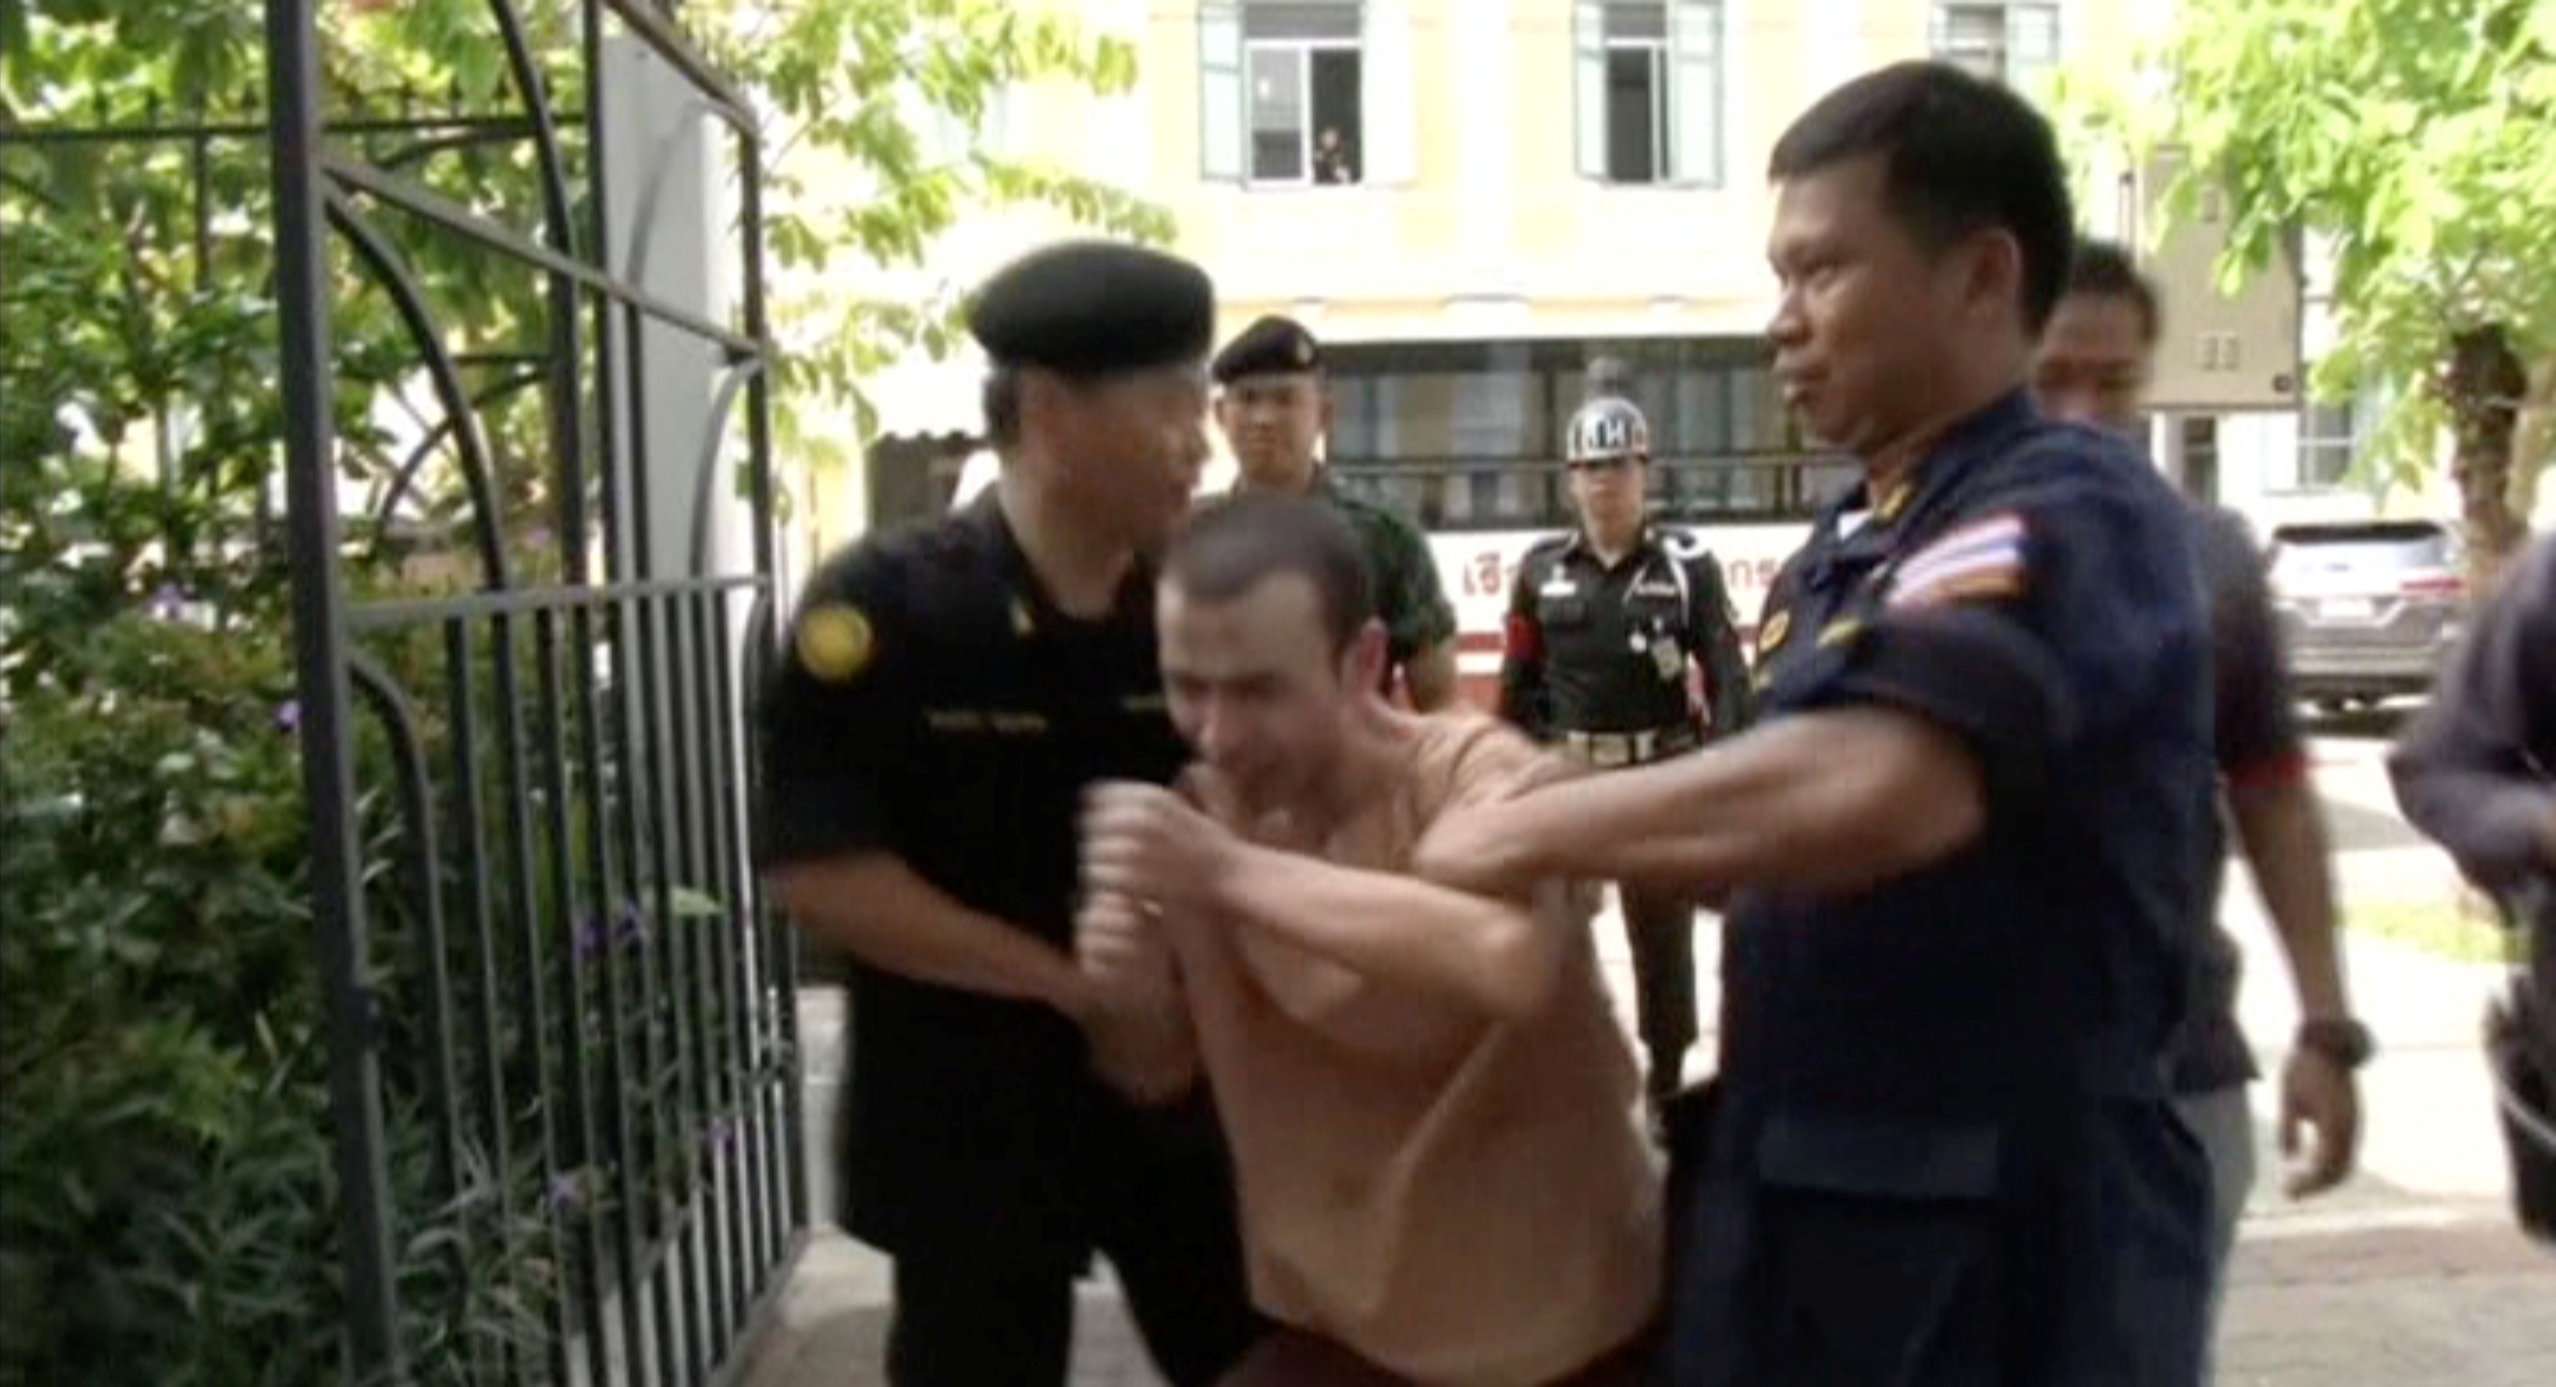 Still image taken from video shows Adem Karadag, also known as Bilal Mohammed, a suspect in last year's Bangkok blast, shouting as he is escorted to court in Bangkok, Thailand, May 17, 2016. REUTERS TV via Reuters ATTENTION EDITORS - FOR EDITORIAL USE ONLY. THIS IMAGE HAS BEEN SUPPLIED BY A THIRD PARTY. IT IS DISTRIBUTED, EXACTLY AS RECEIVED BY REUTERS, AS A SERVICE TO CLIENTS.